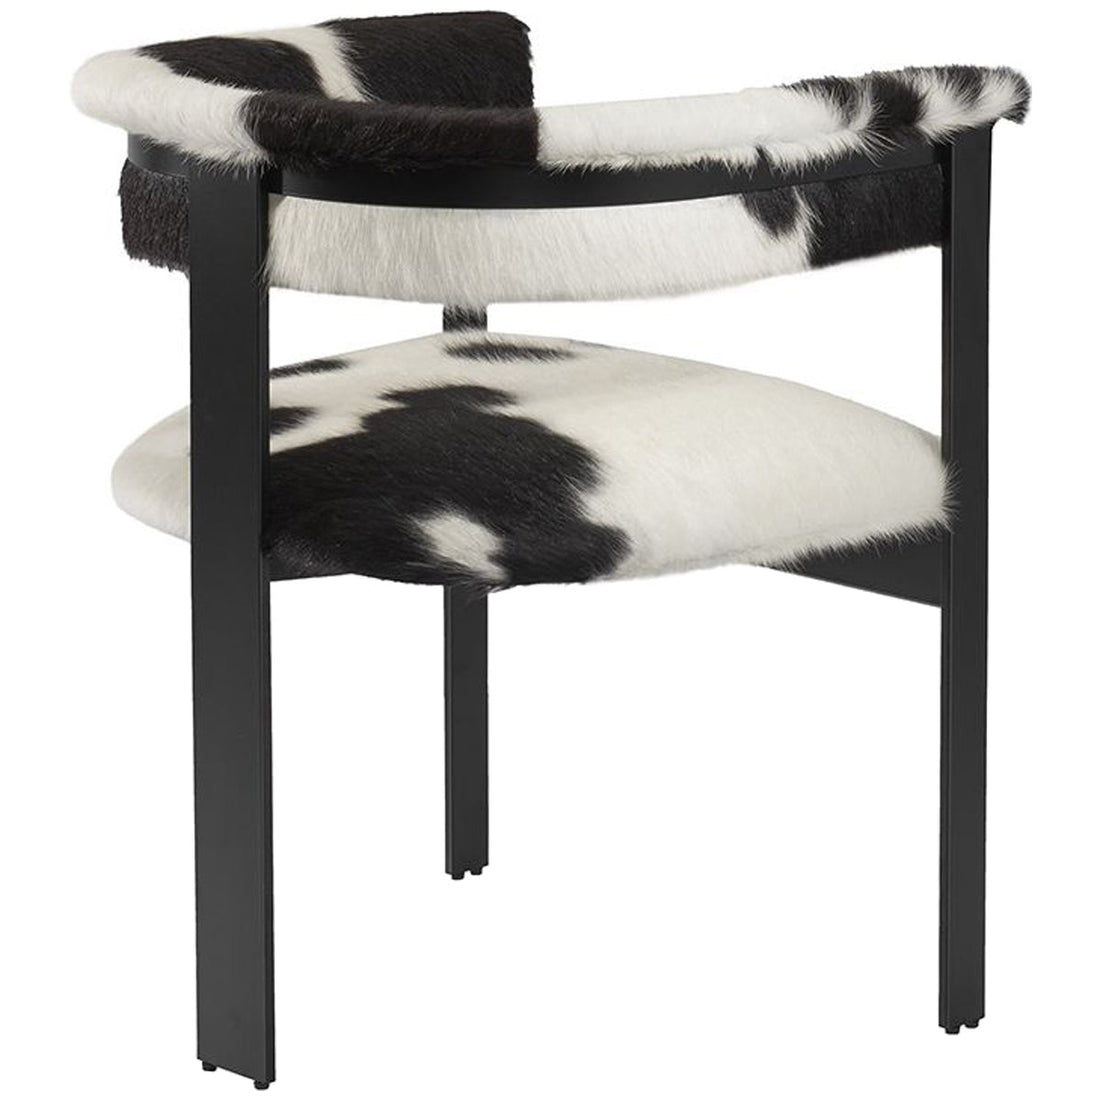 Interlude Home Darcy Dining Chair - Spotted Hide